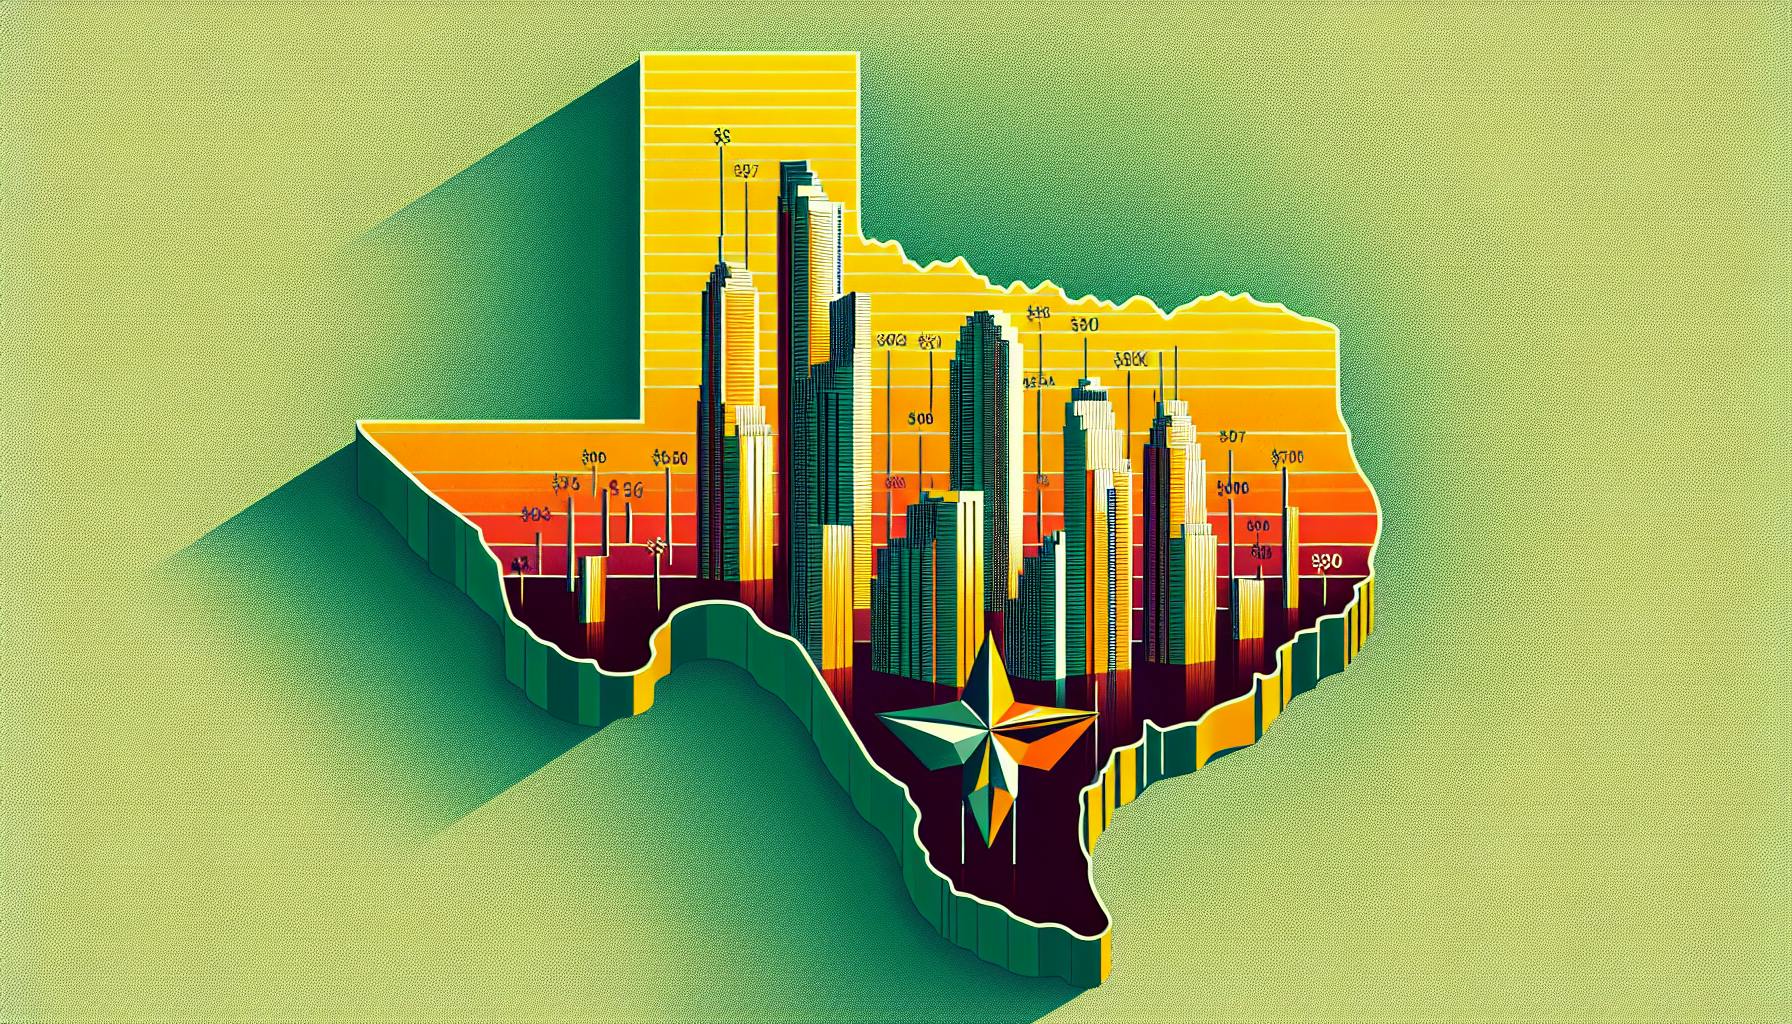 Accounting Salaries in Texas: Lone Star Ledger - A Financial Forecast